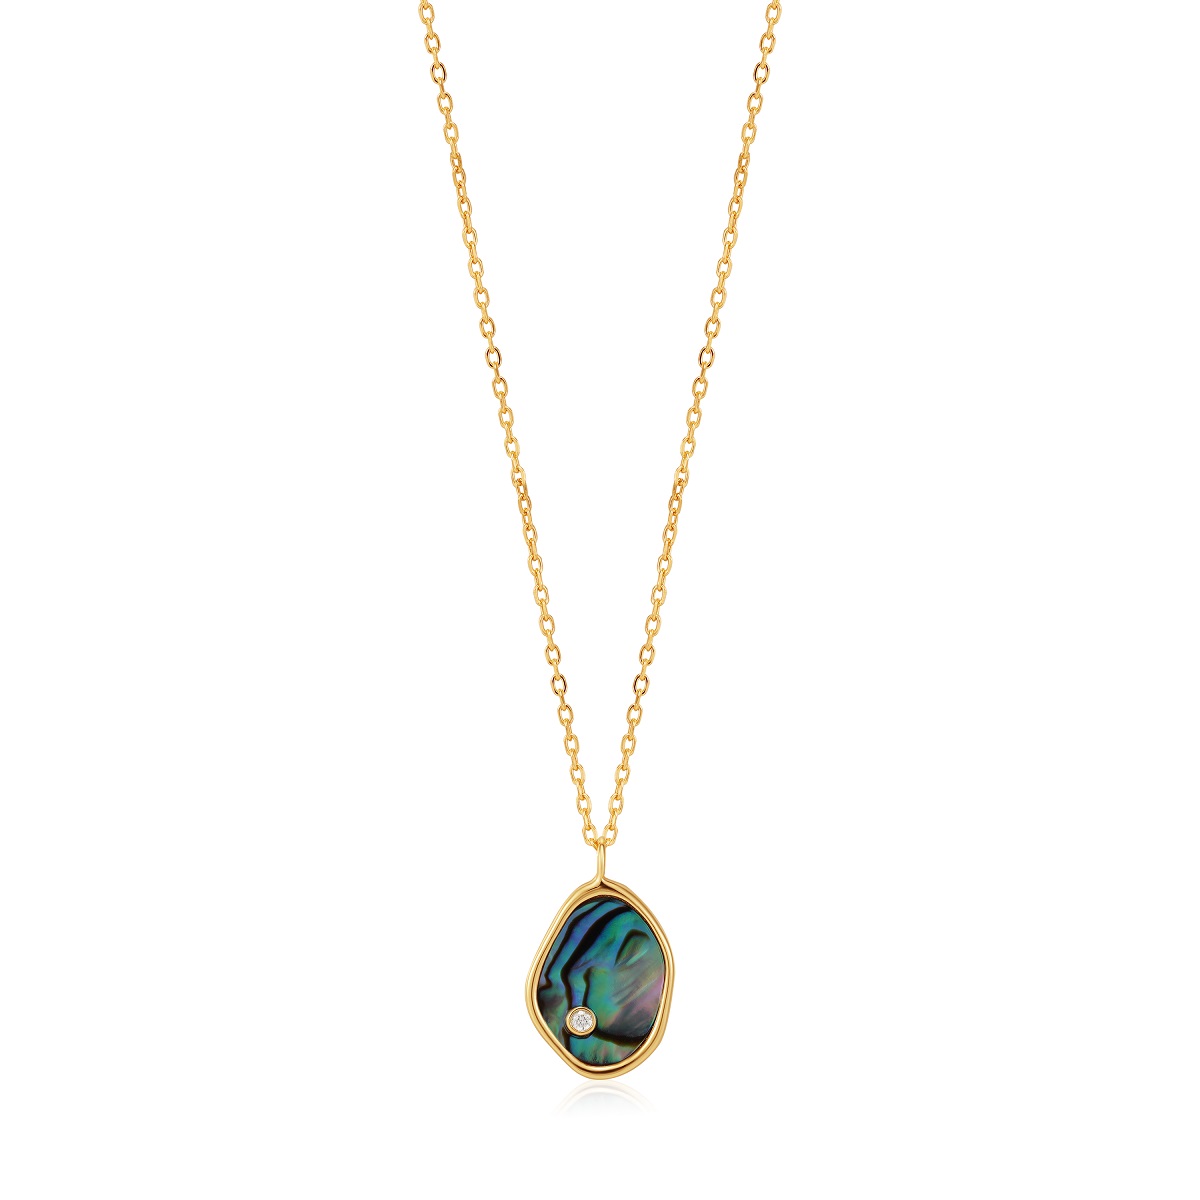 Ania Haie Tidal Abalone Necklace